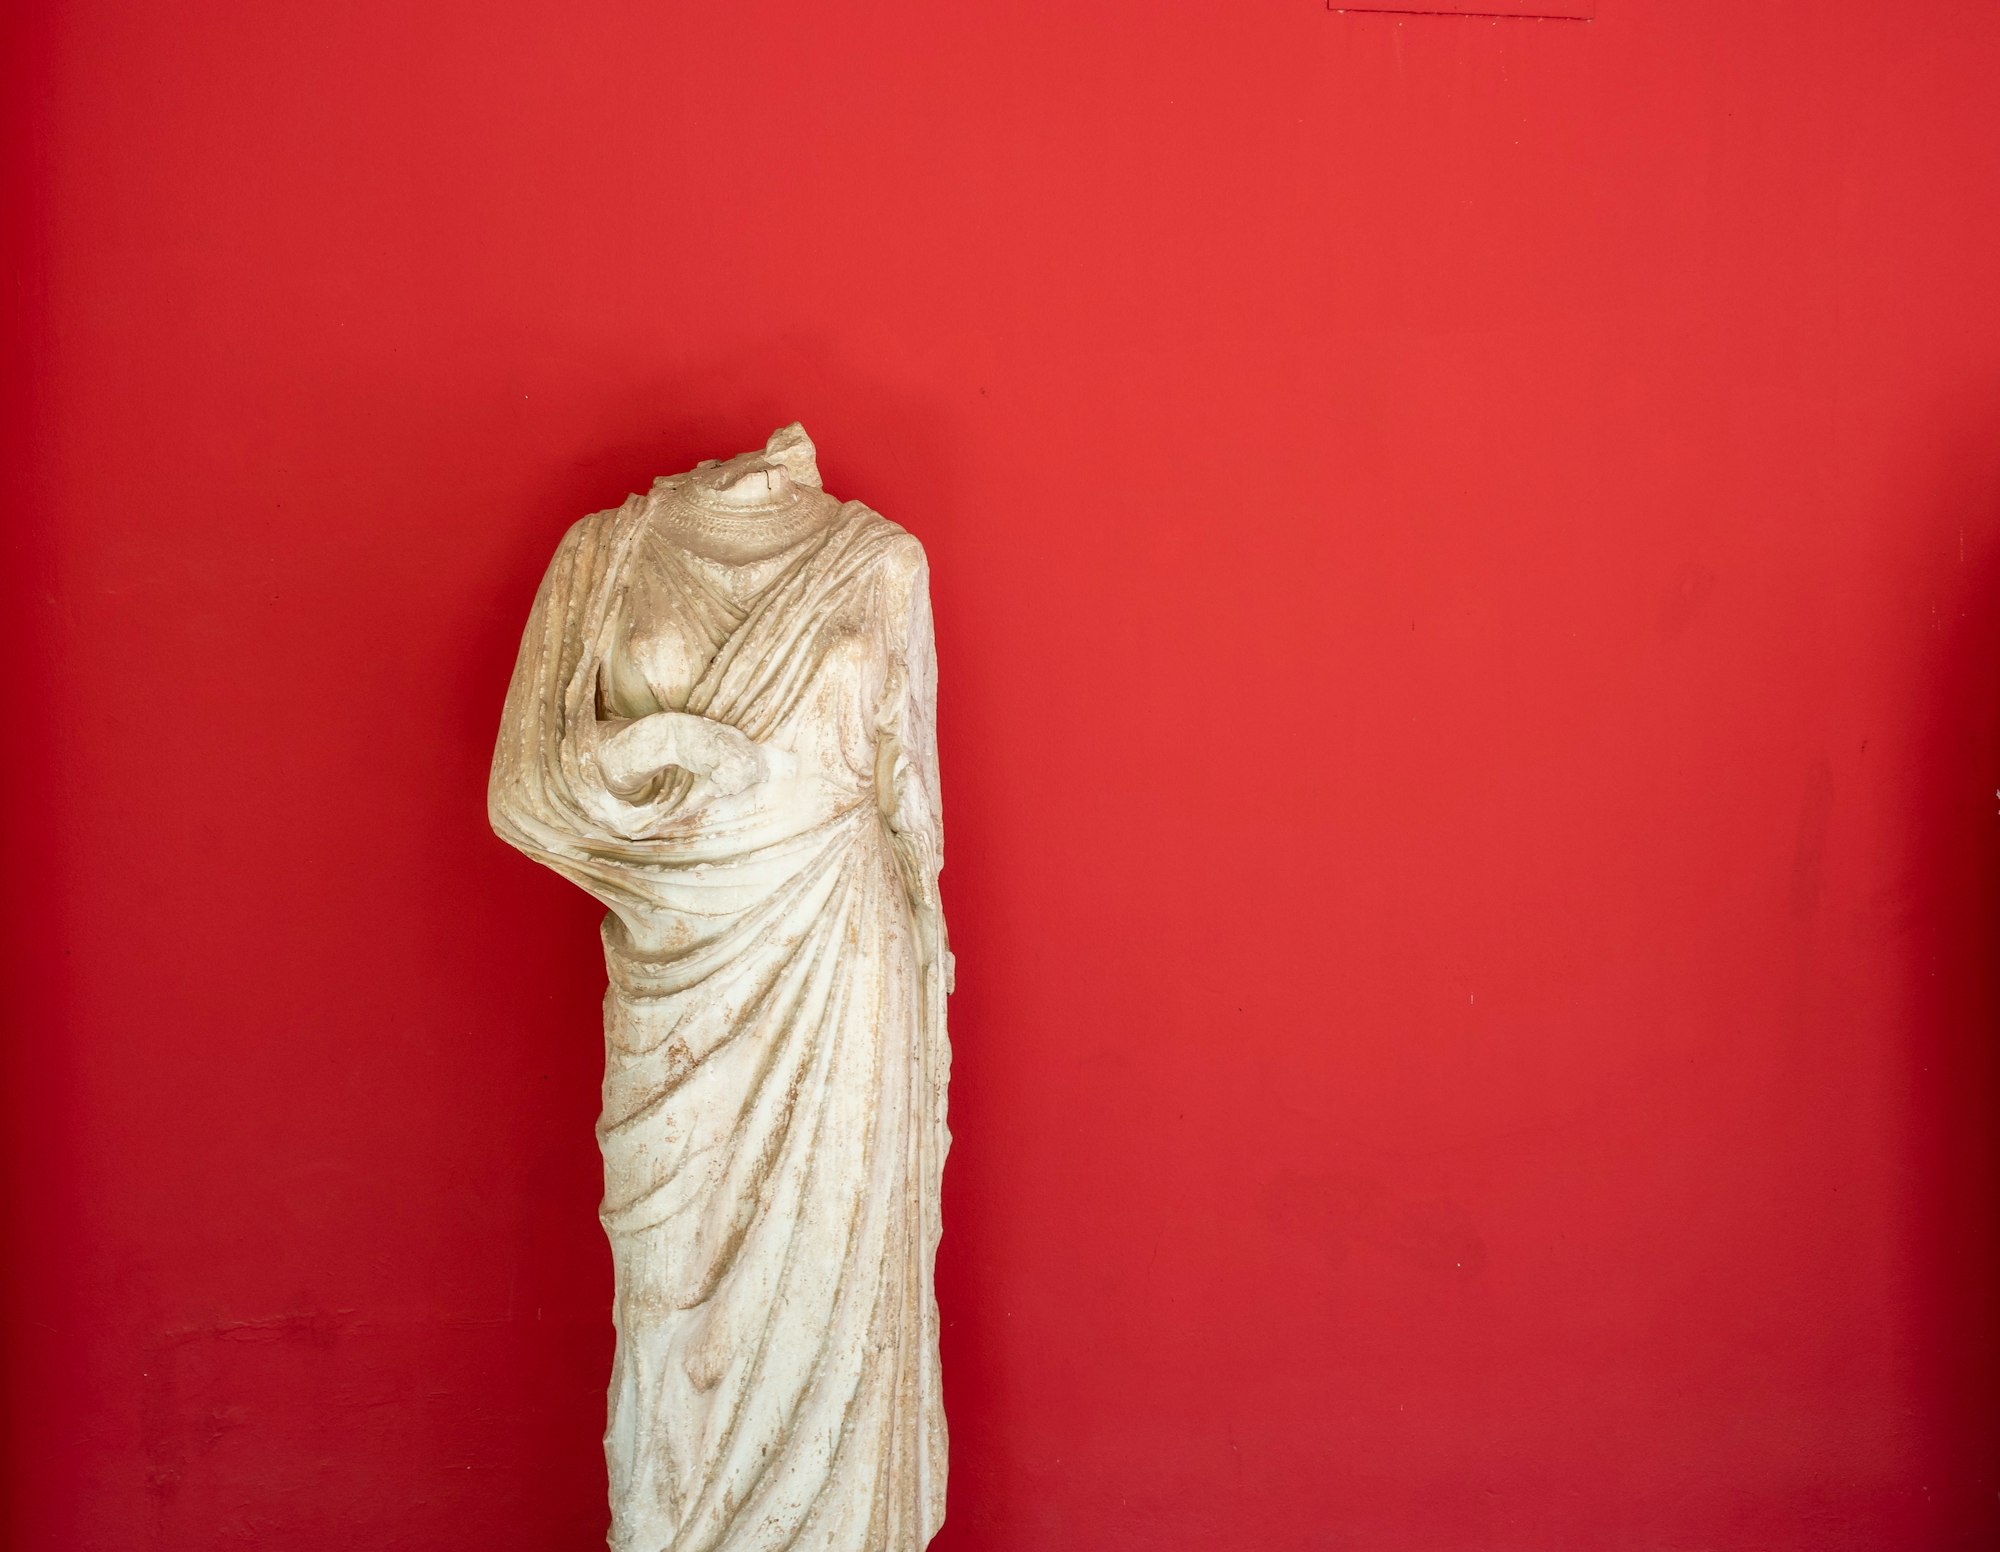 The National Archaeological Museum of Athens, Greece. Photo taken in the inner garden with natural light.